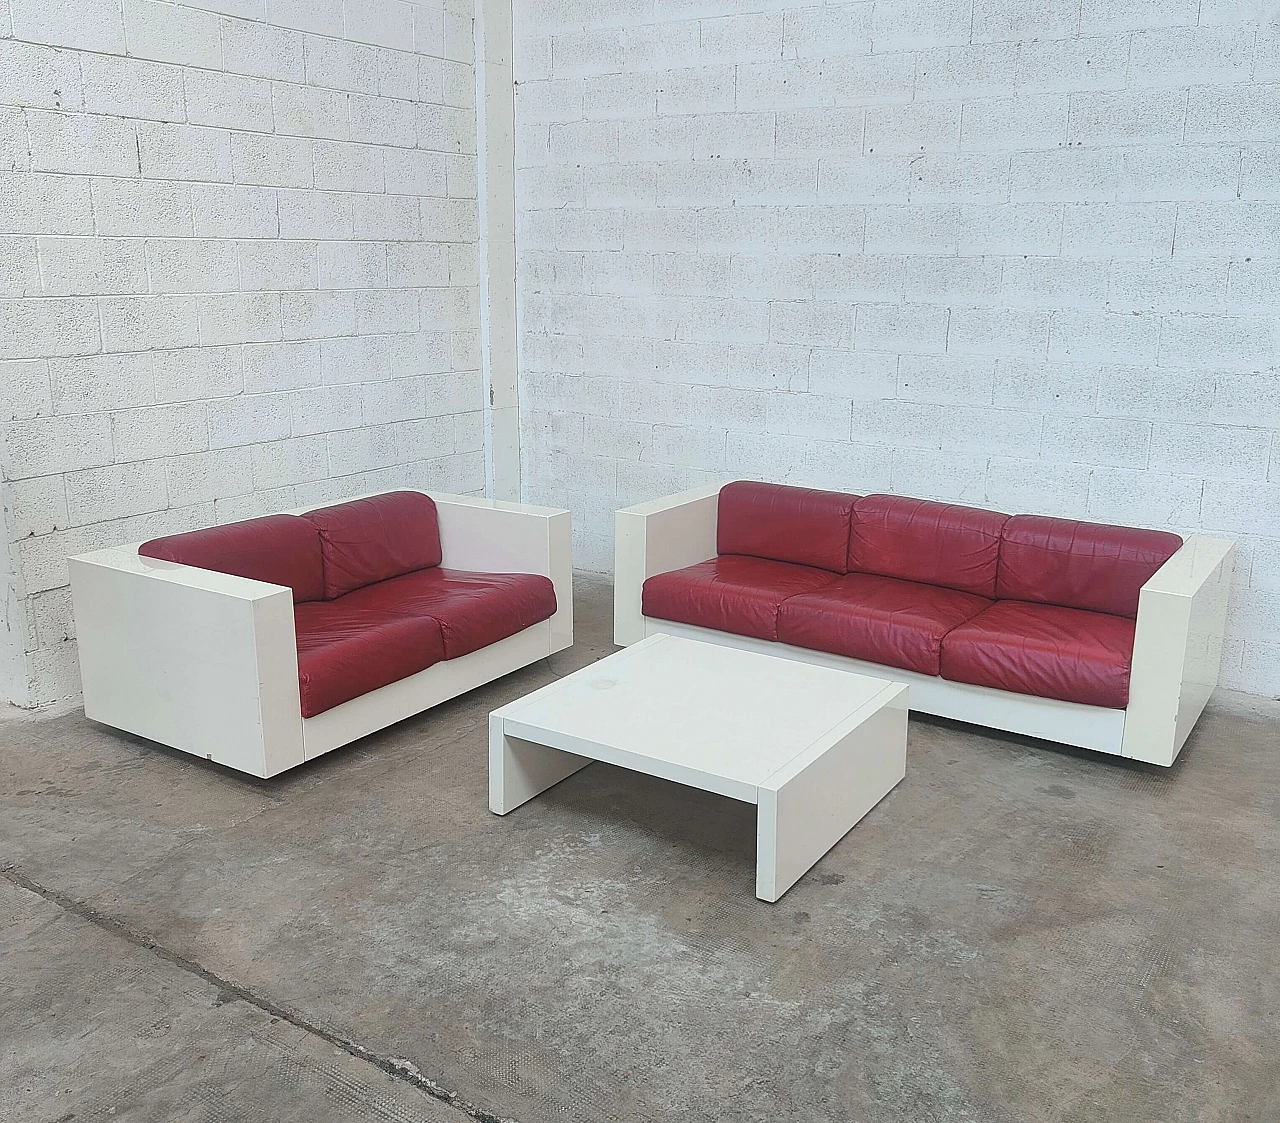 Pair of Saratoga sofas and coffee table by Lella and Massimo Vignelli for Saratoga, 1964 1